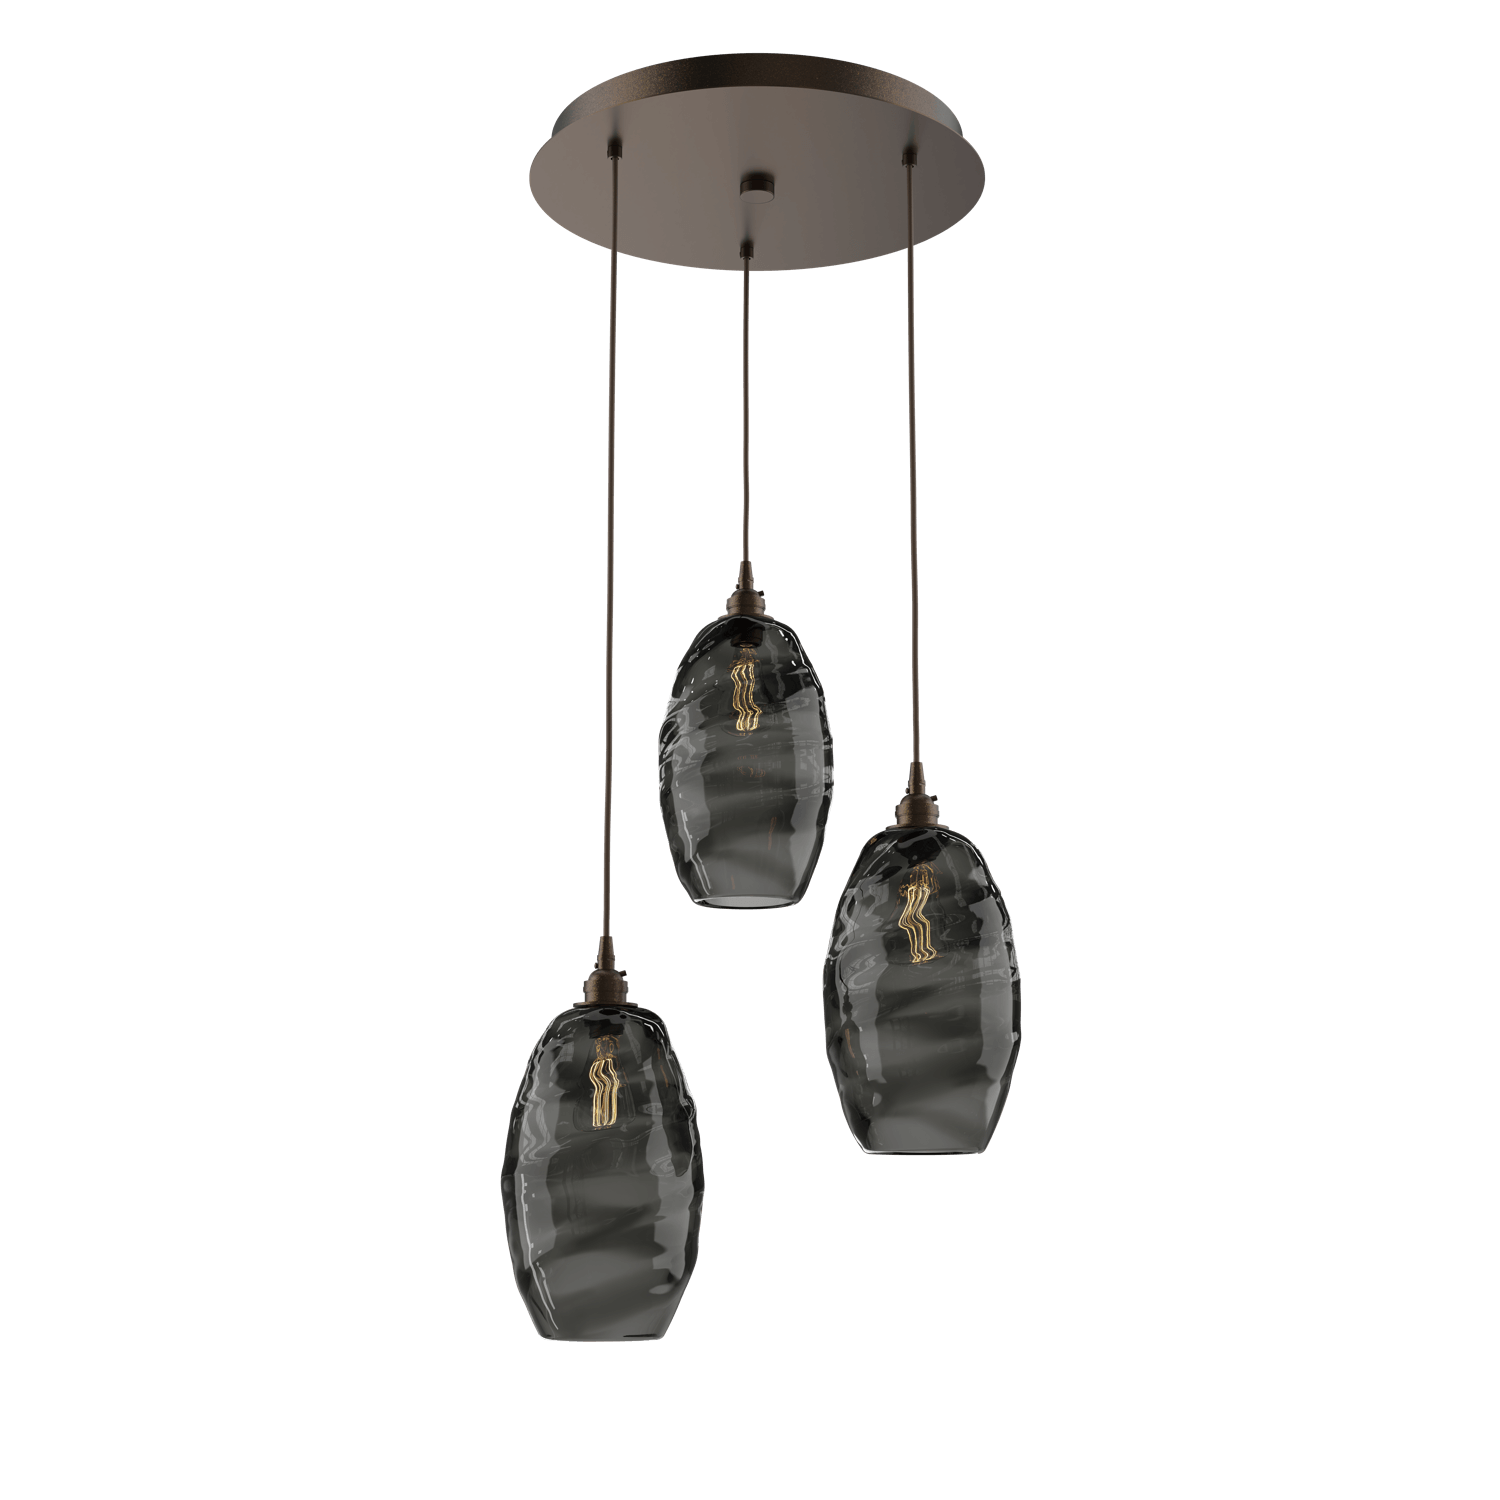 CHB0035-03-FB-OS-Hammerton-Studio-Optic-Blown-Glass-Elisse-3-light-round-pendant-chandelier-with-flat-bronze-finish-and-optic-smoke-blown-glass-shades-and-incandescent-lamping